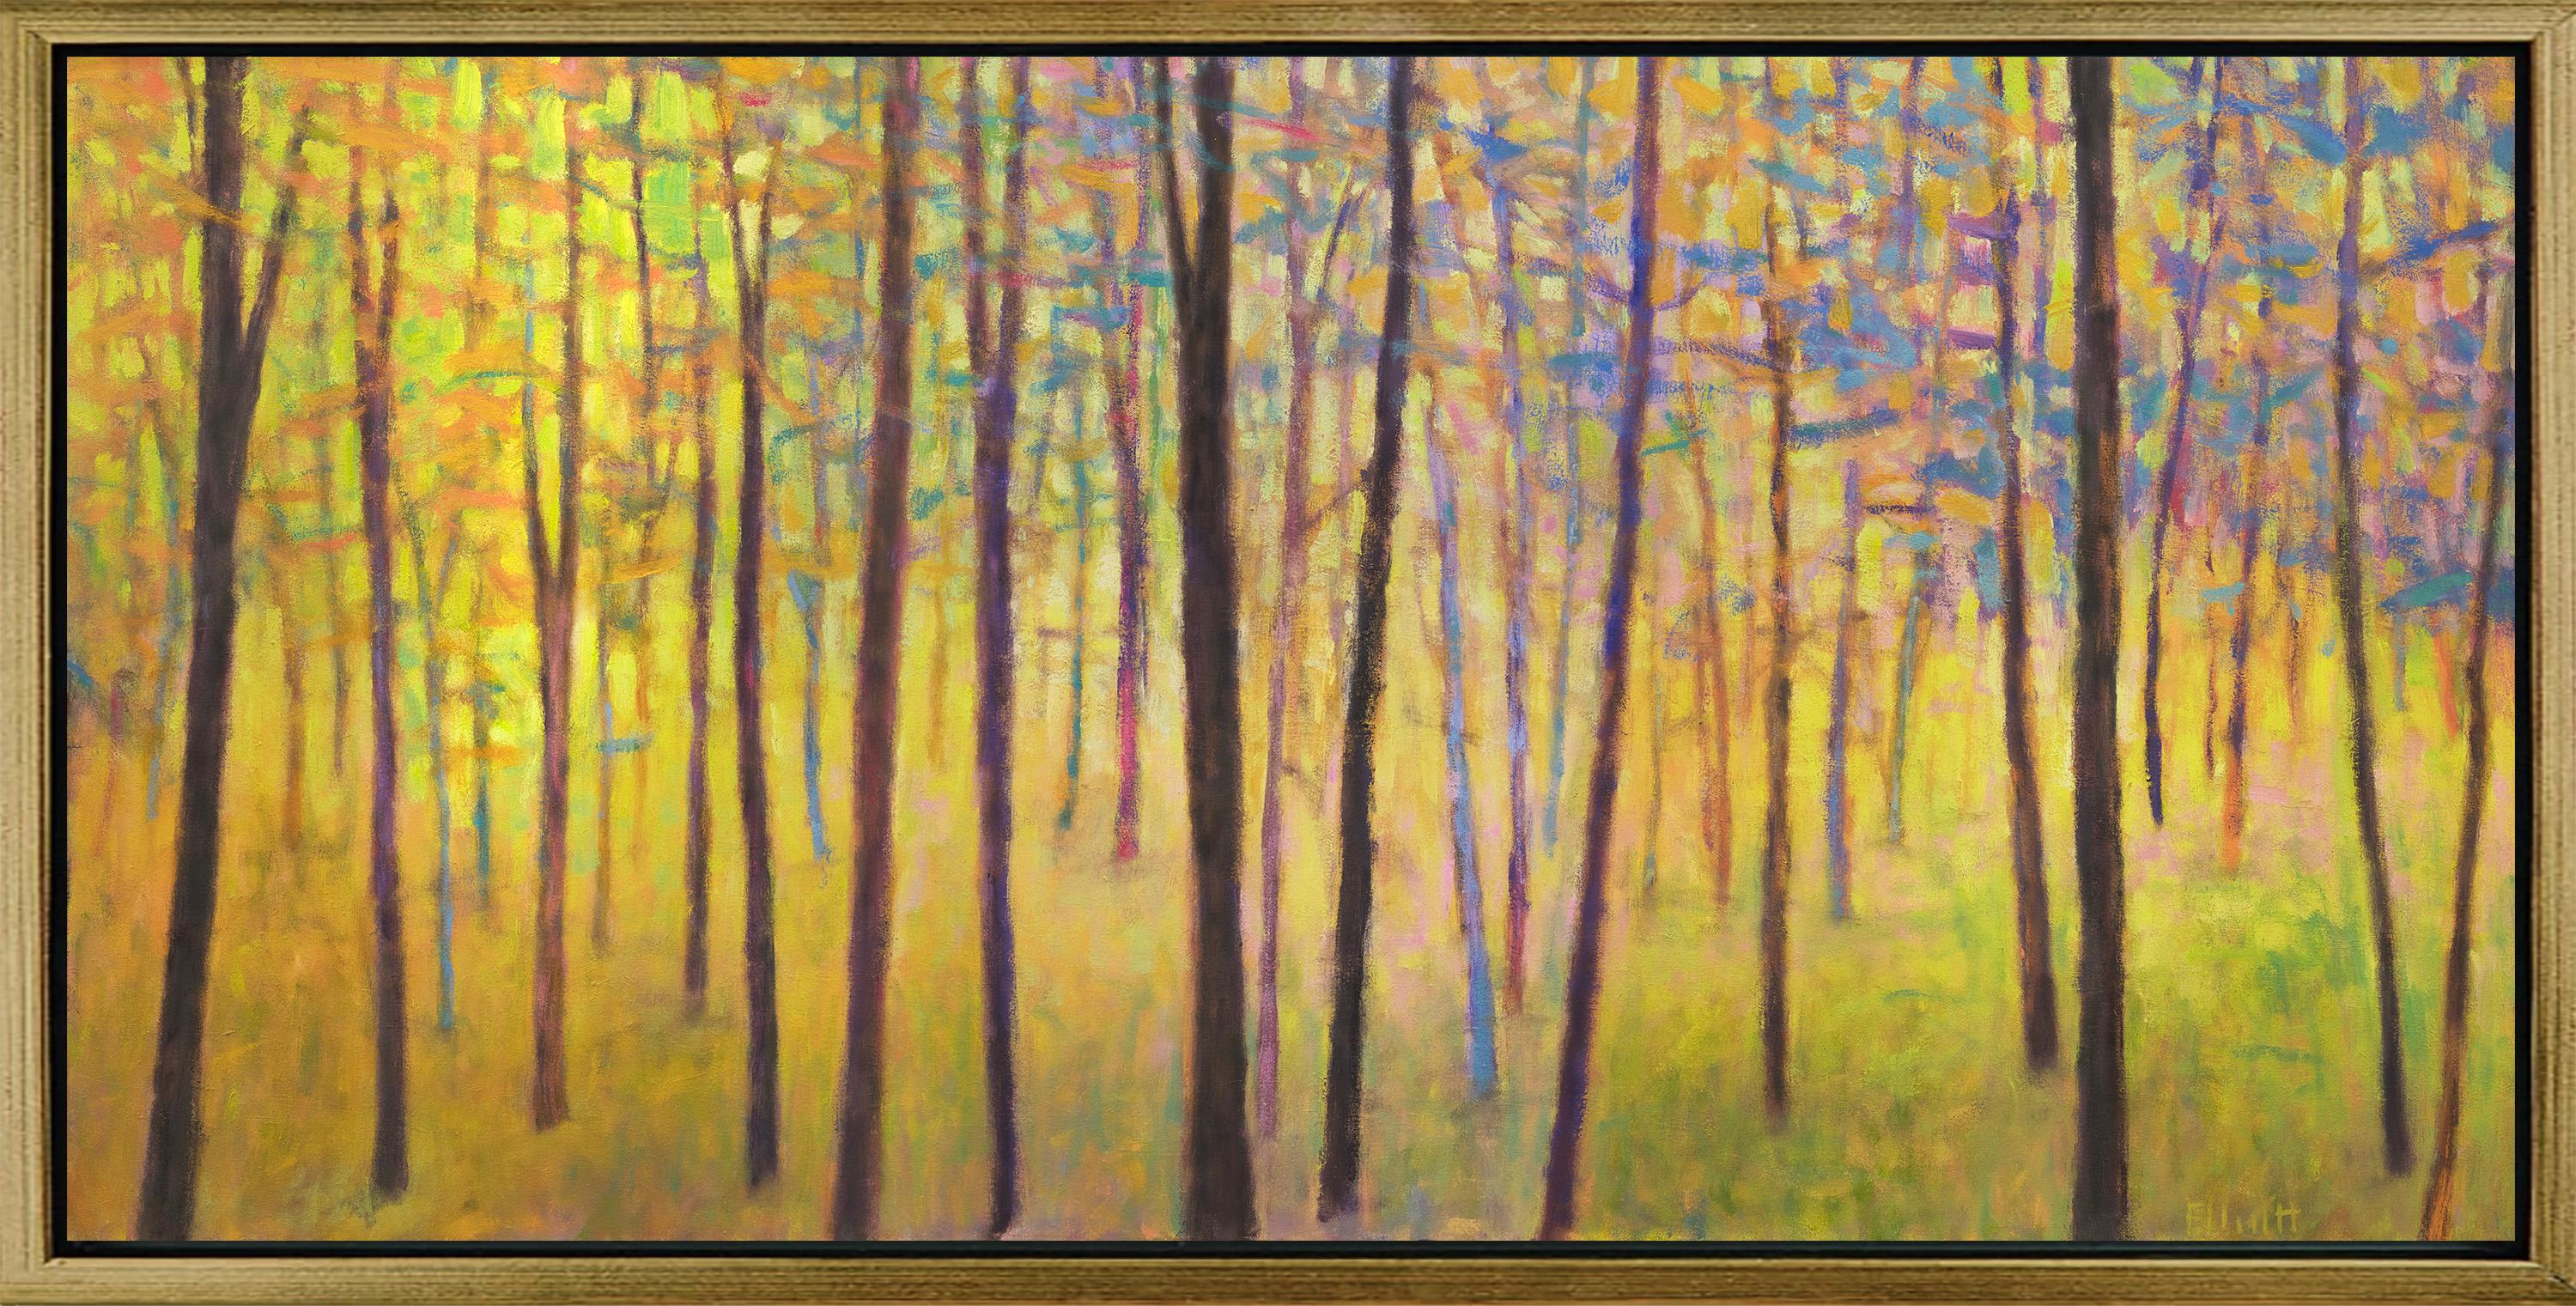 Ken Elliott Landscape Print - "In the Colorful Forest, " Framed Limited Edition Giclee Print, 24" x 48"